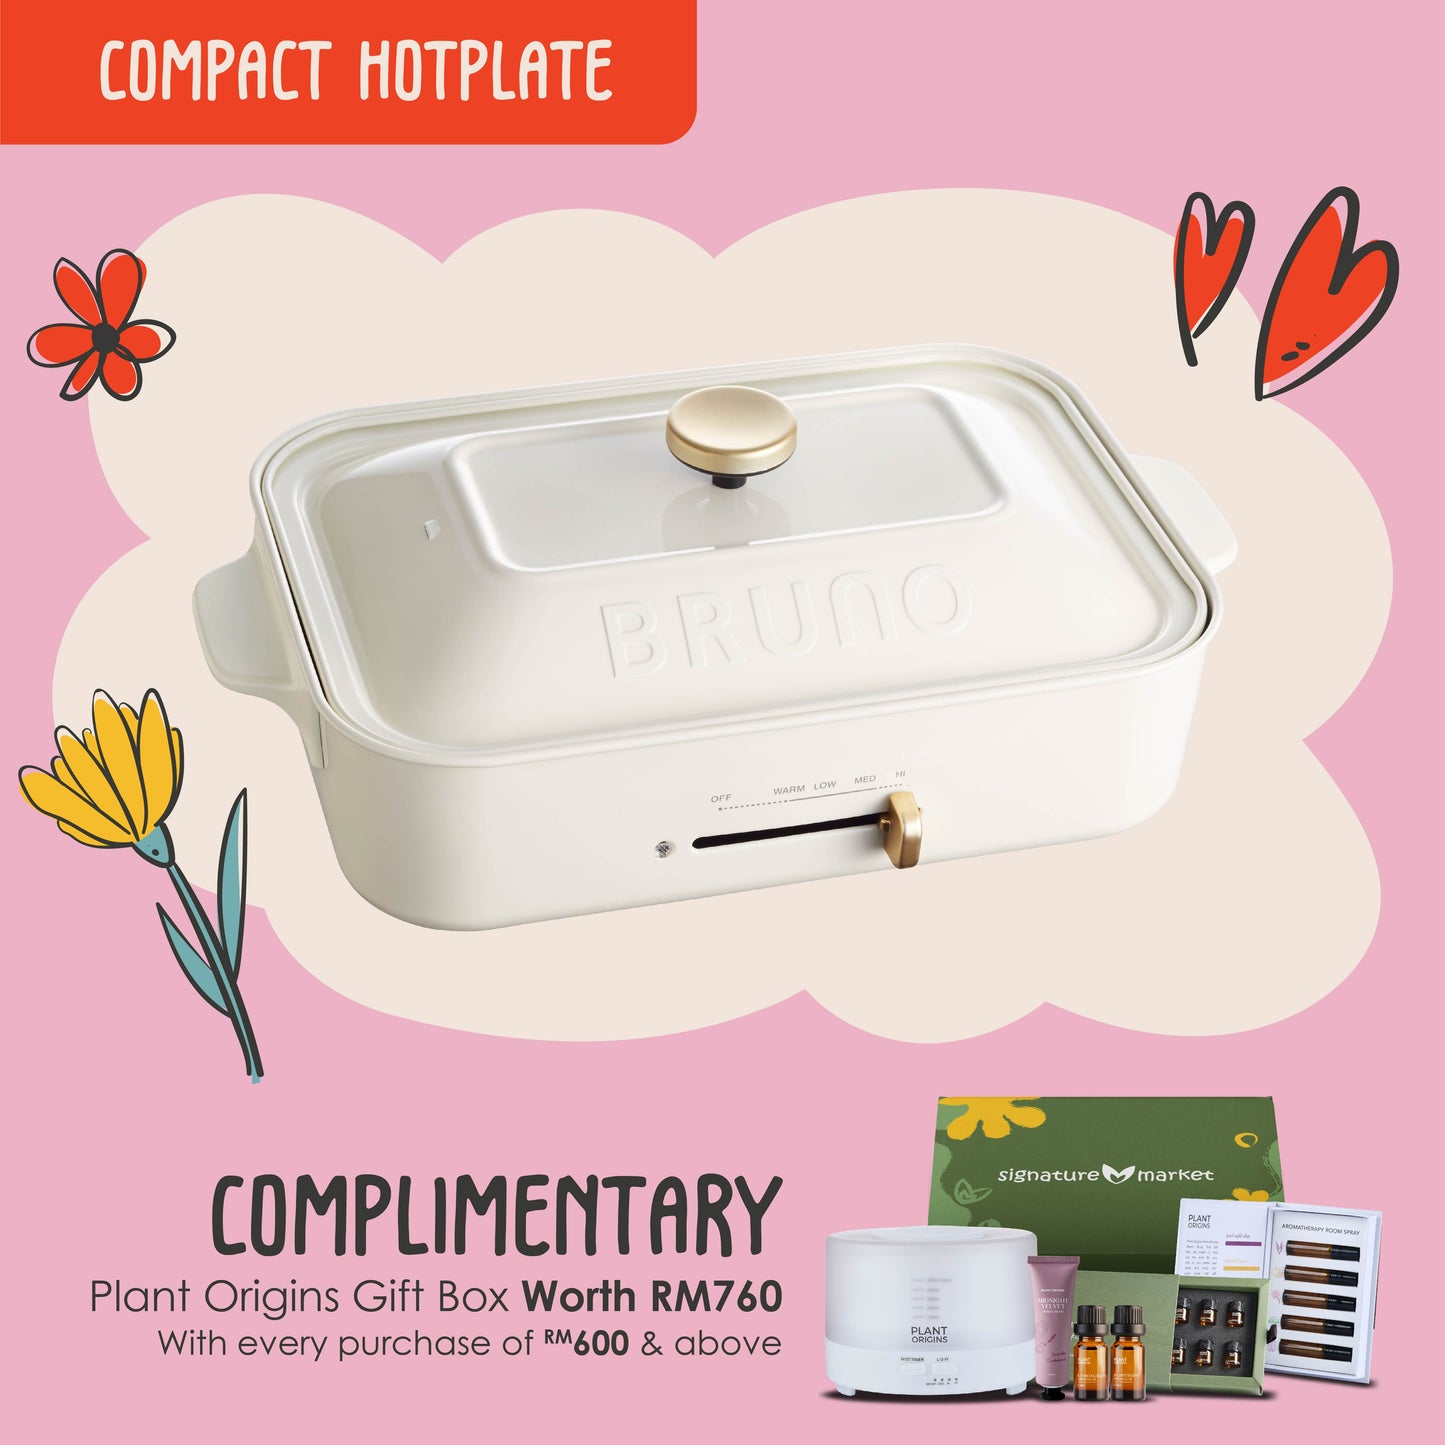 Compact Hotplate in White